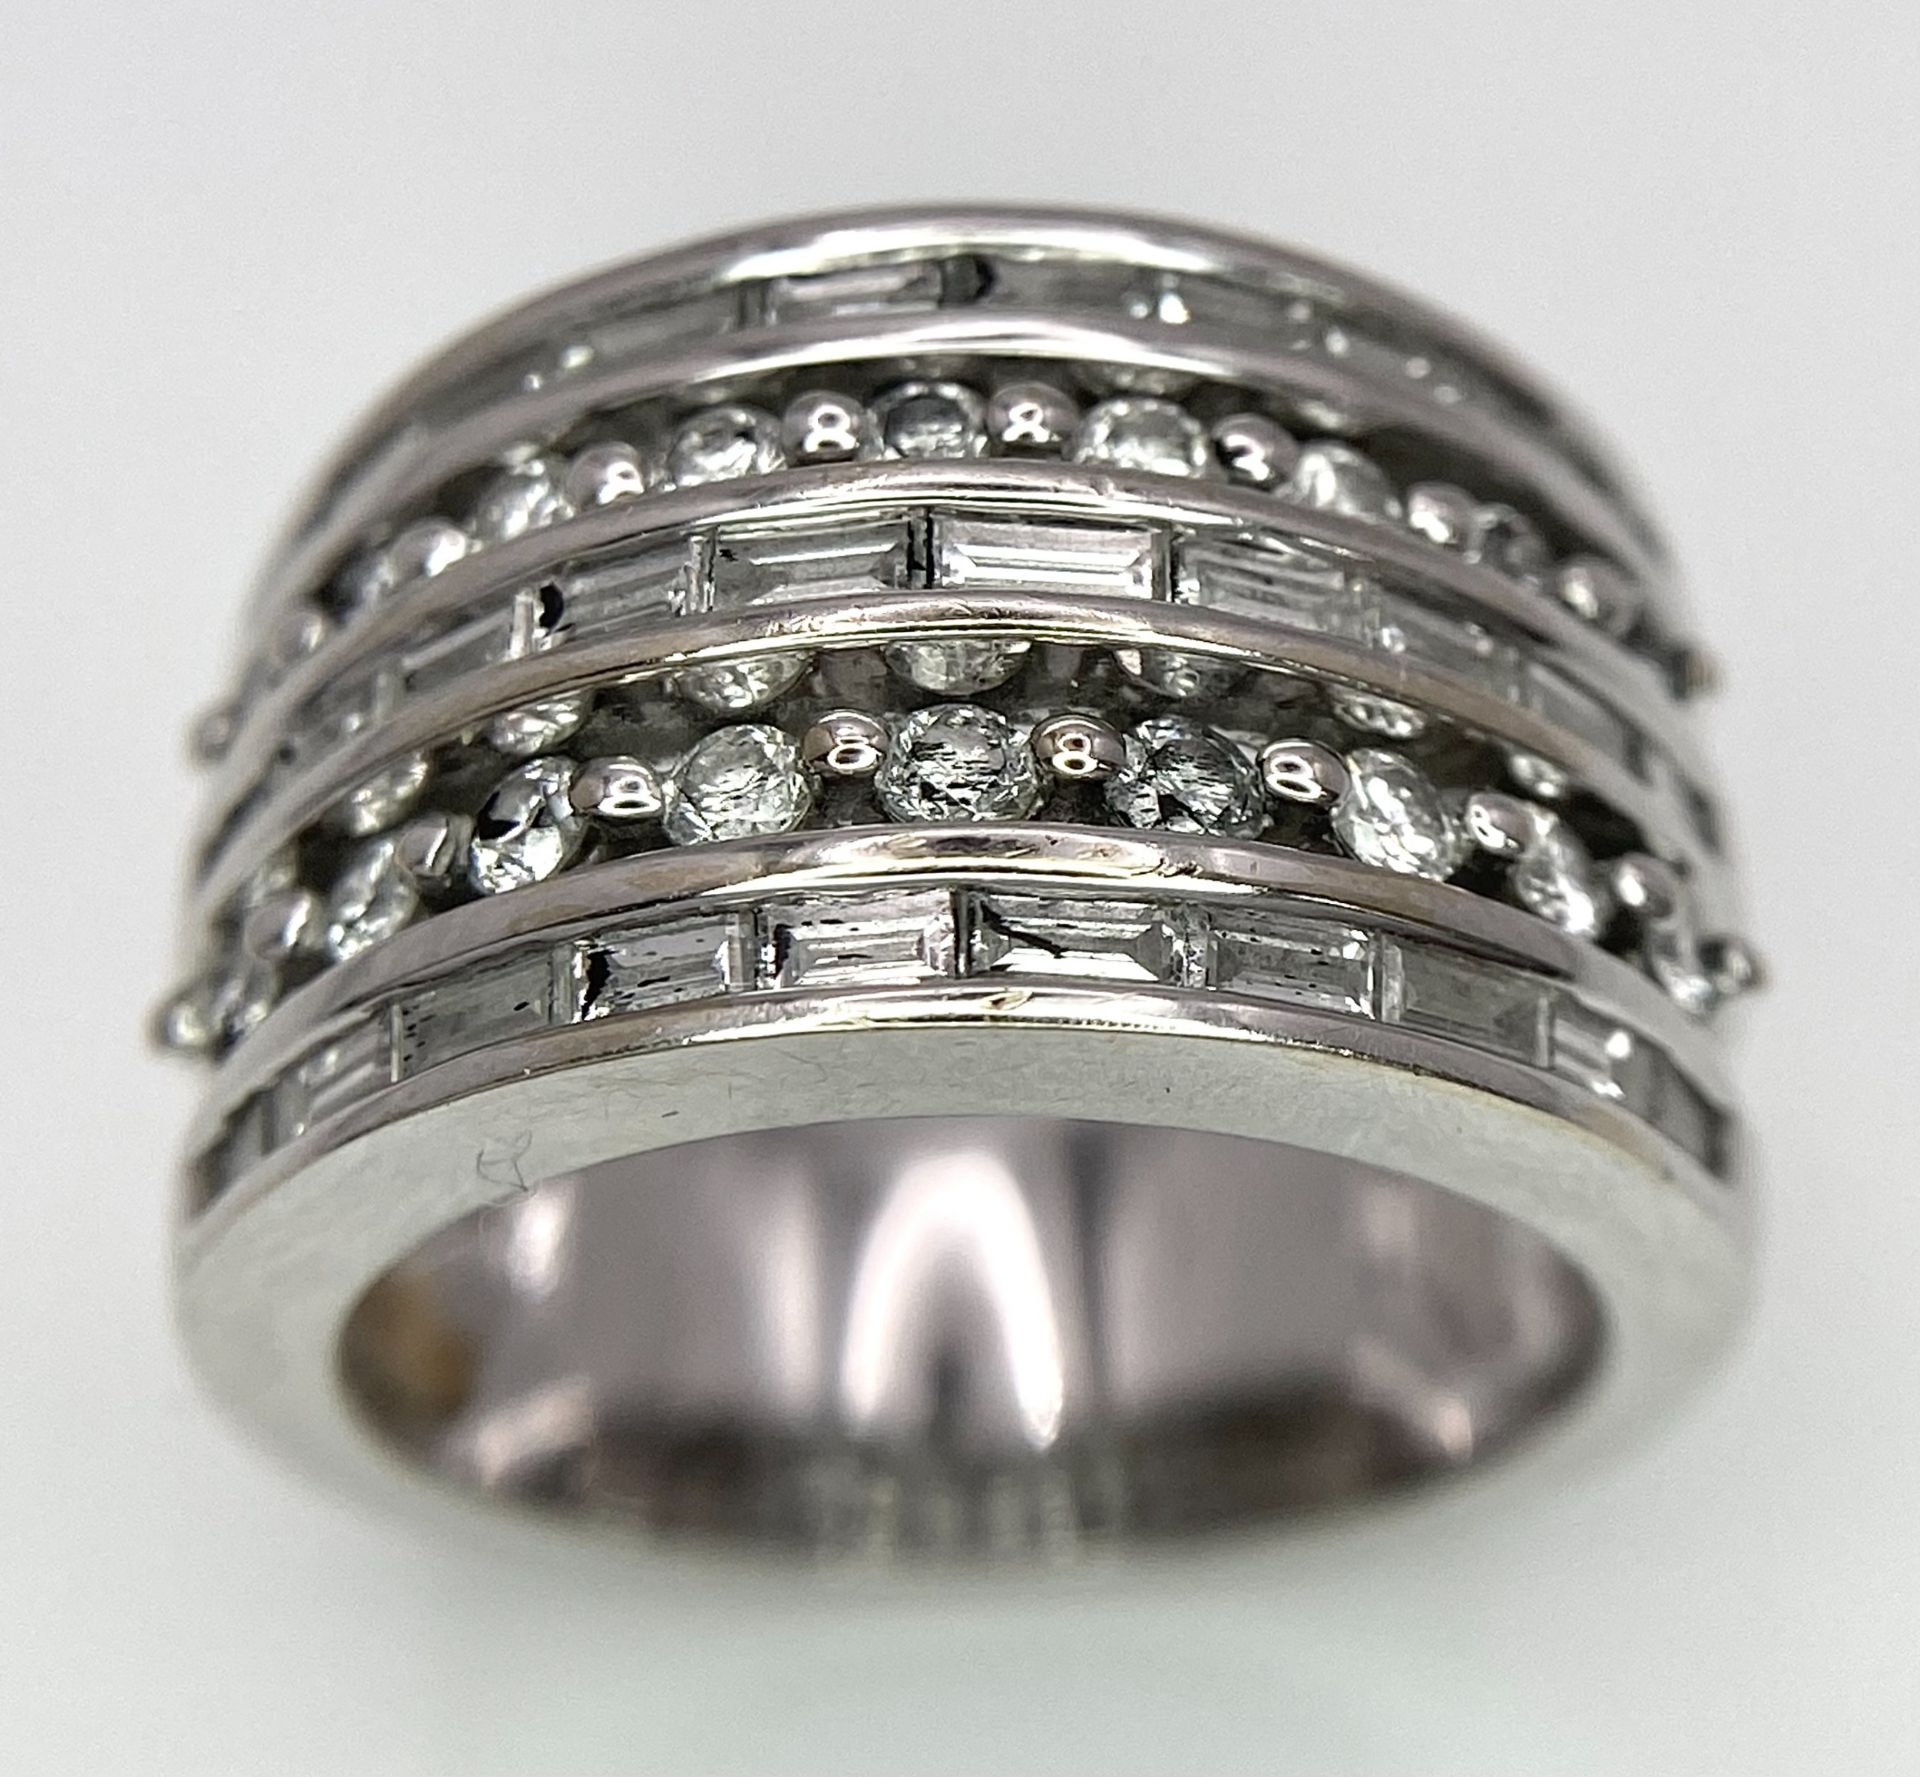 AN 18K WHITE GOLD 5 ROW DIAMOND RING. MIXTURE OF ROUND BRILLIANT CUTS AND BAGUETTE CUT DIAMONDS.